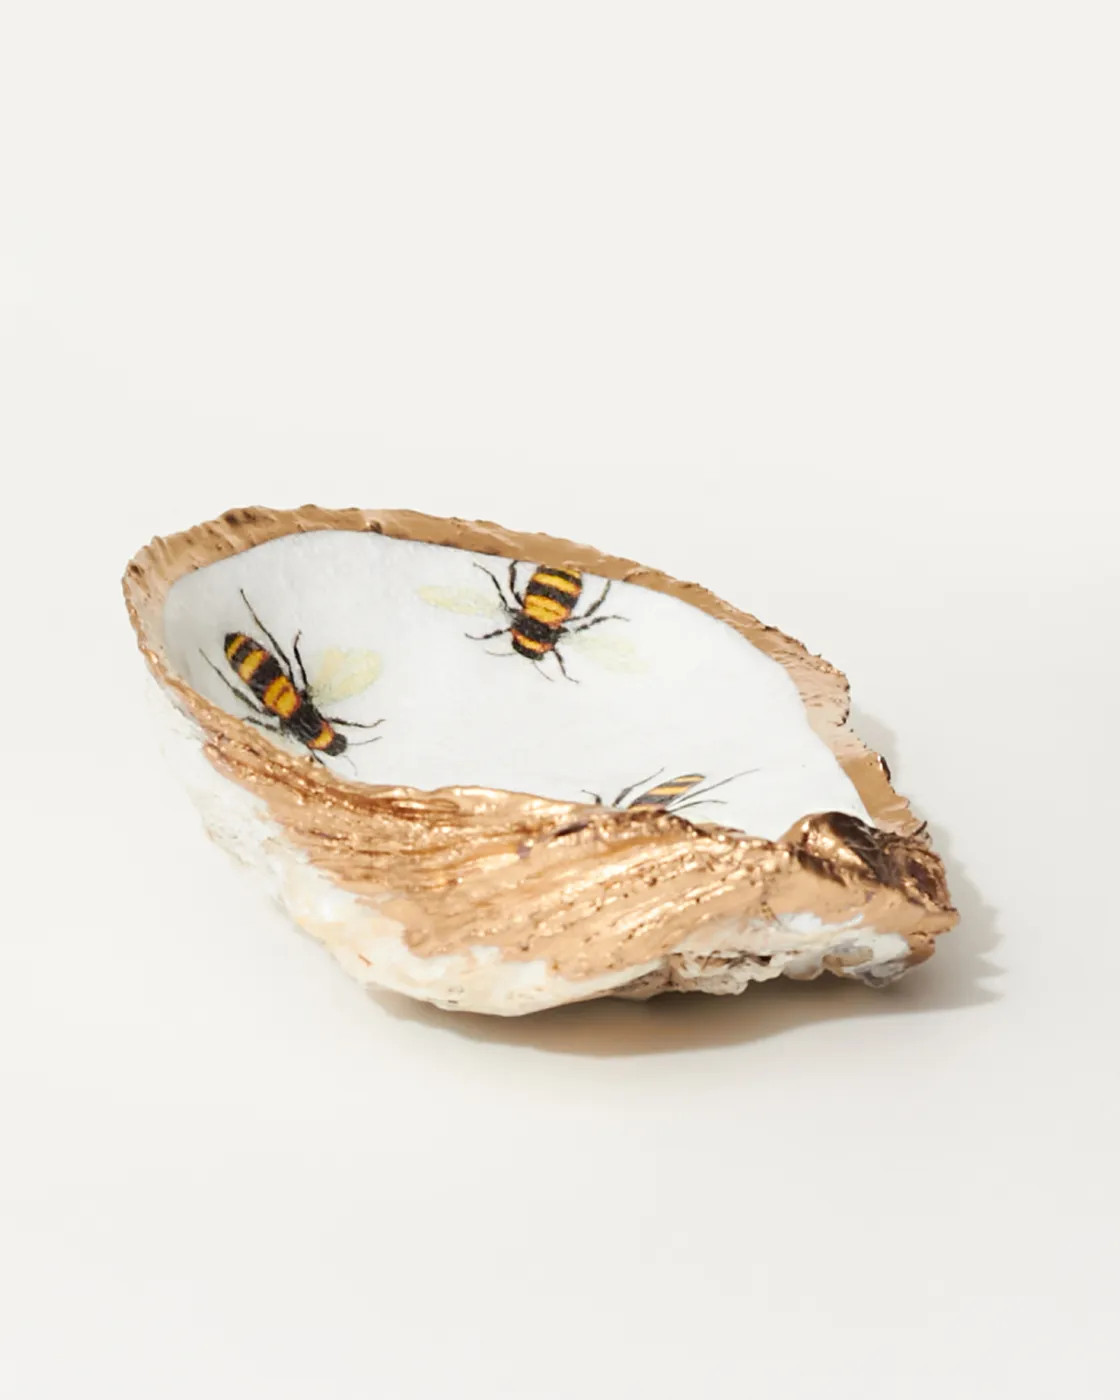 Bee Oyster Jewelry Dish